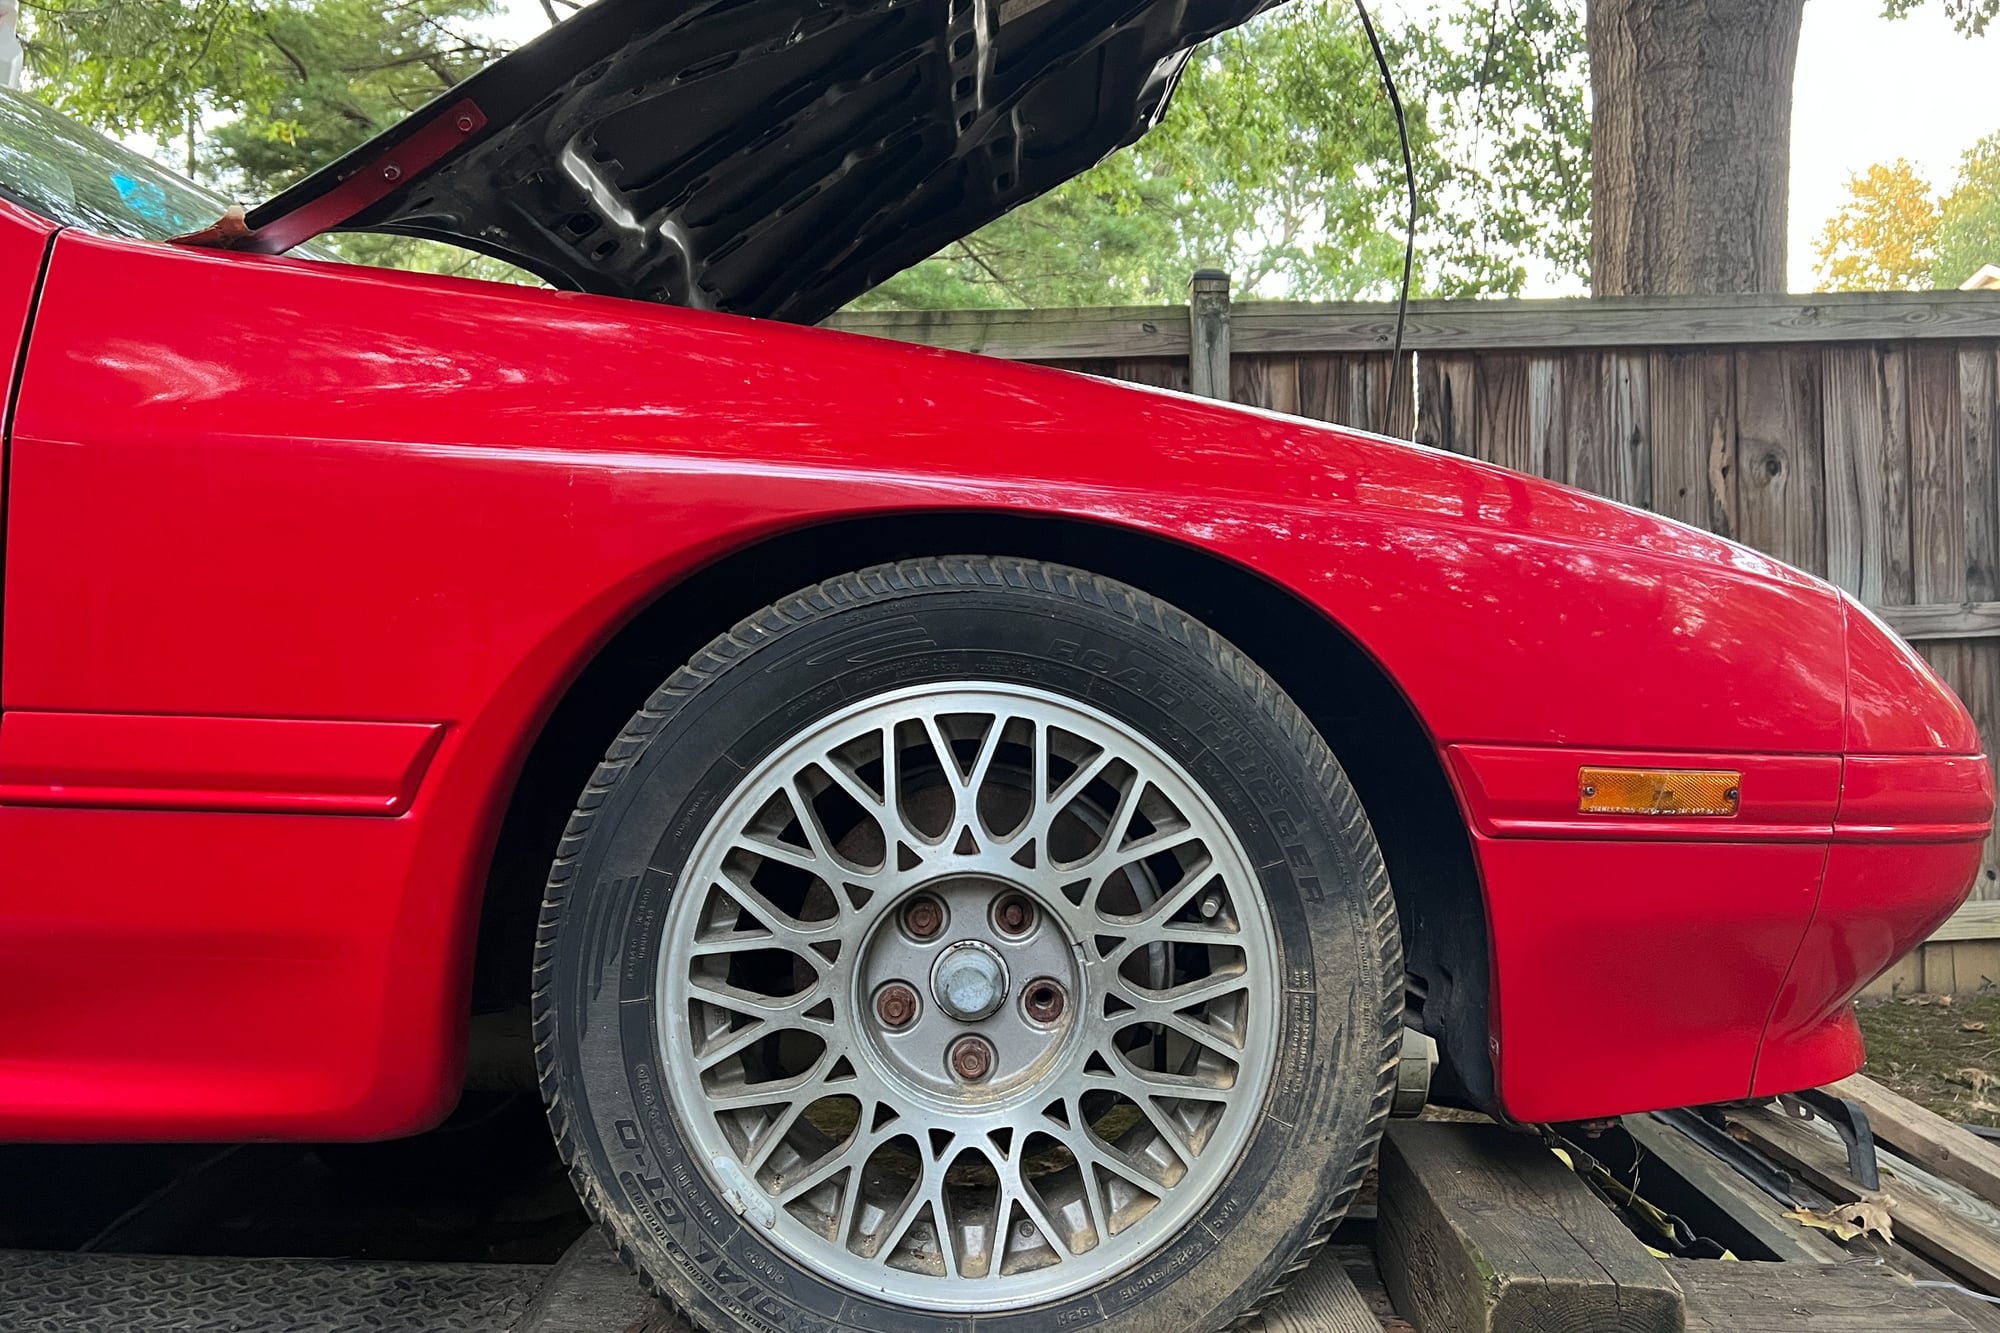 1989 Mazda RX-7 - 89 Mazda RX-7 GTUs - Restoration Project - Prefer to sell as whole - Used - VIN JM1FC3318K0703839 - Other - 2WD - Manual - Coupe - Red - Bowie, MD 20716, United States